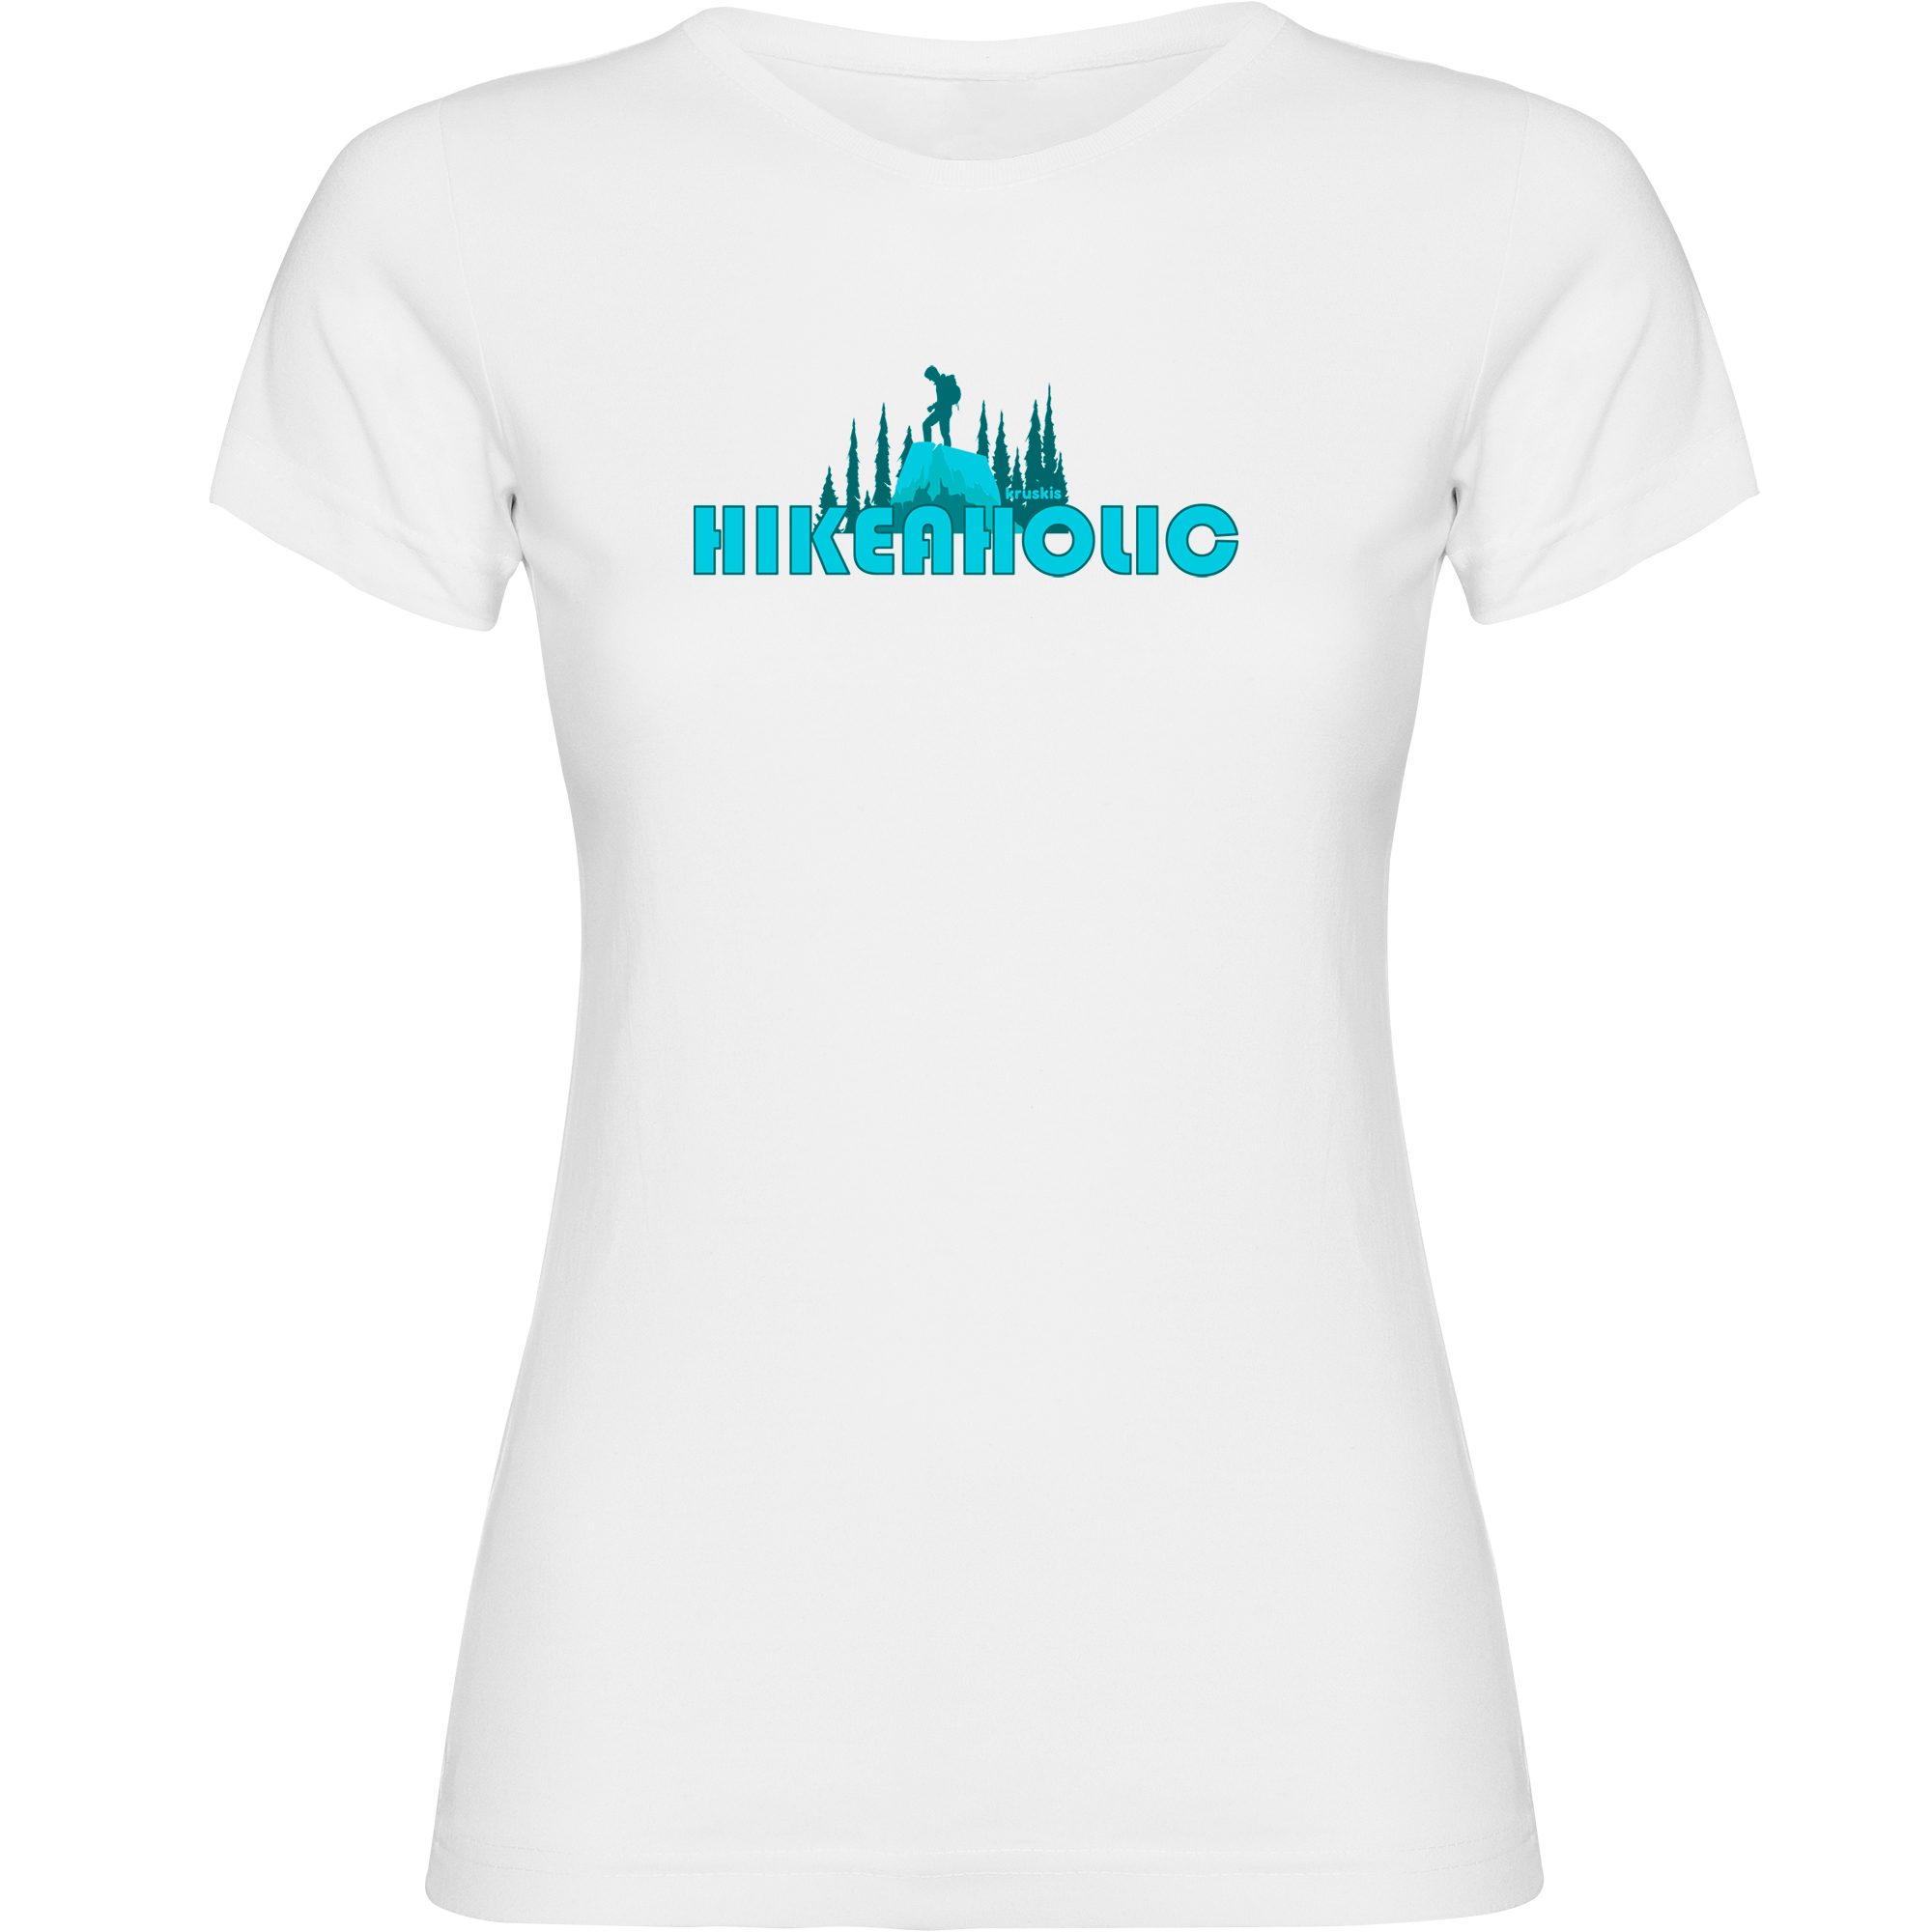 T shirt Mountaineering Hikeaholic Short Sleeves Woman